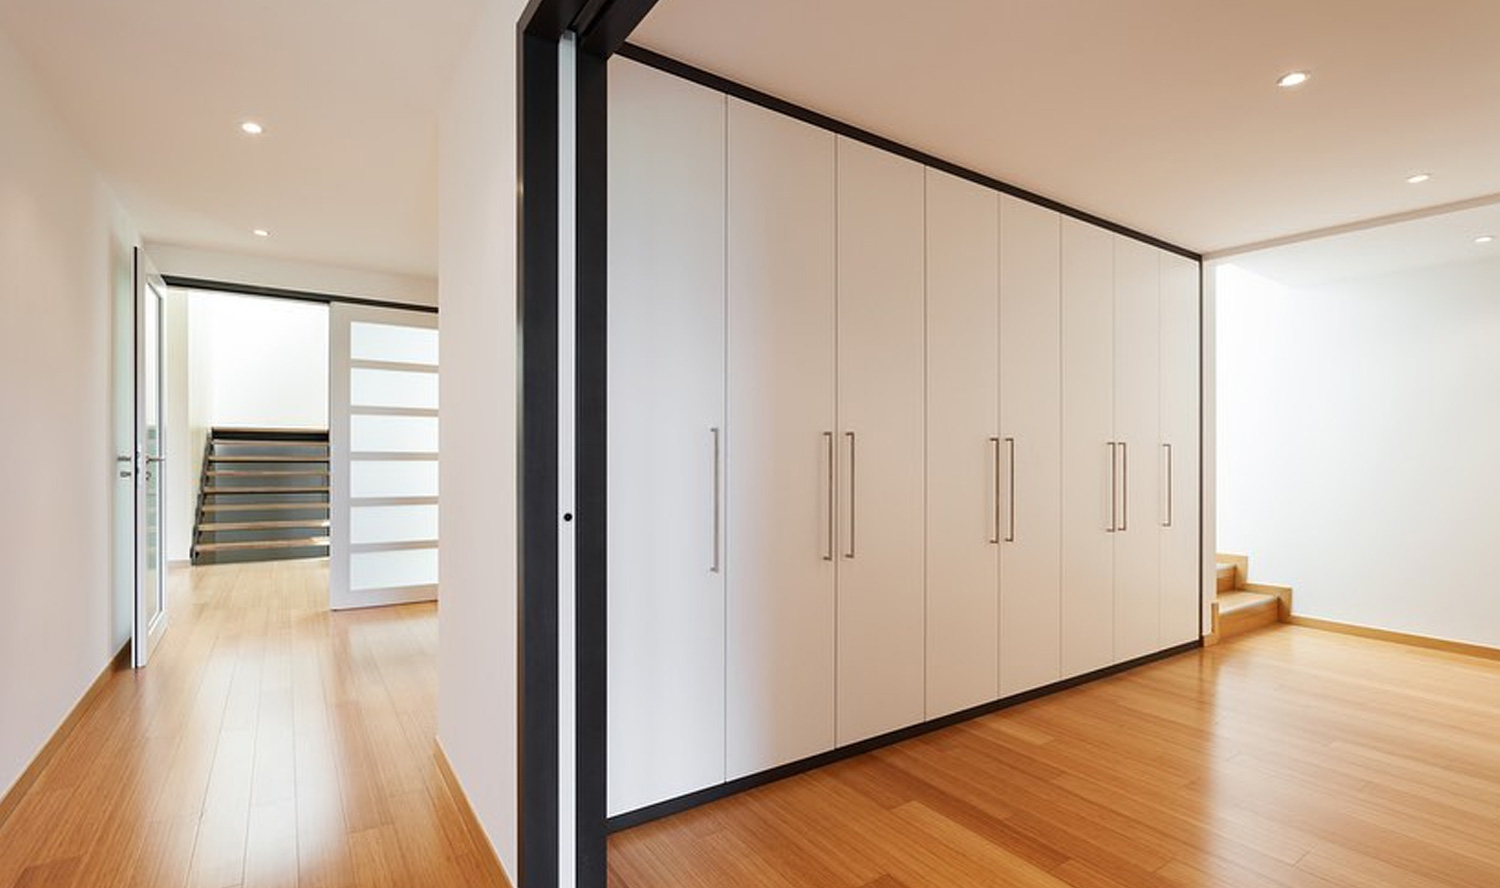 Artuz offers Lacquered Glass Sliding Wardrobe Shutters in Bangalore, F2C wardrobes with a shiny and rich finish to your wardrobe with the sliding mechanism